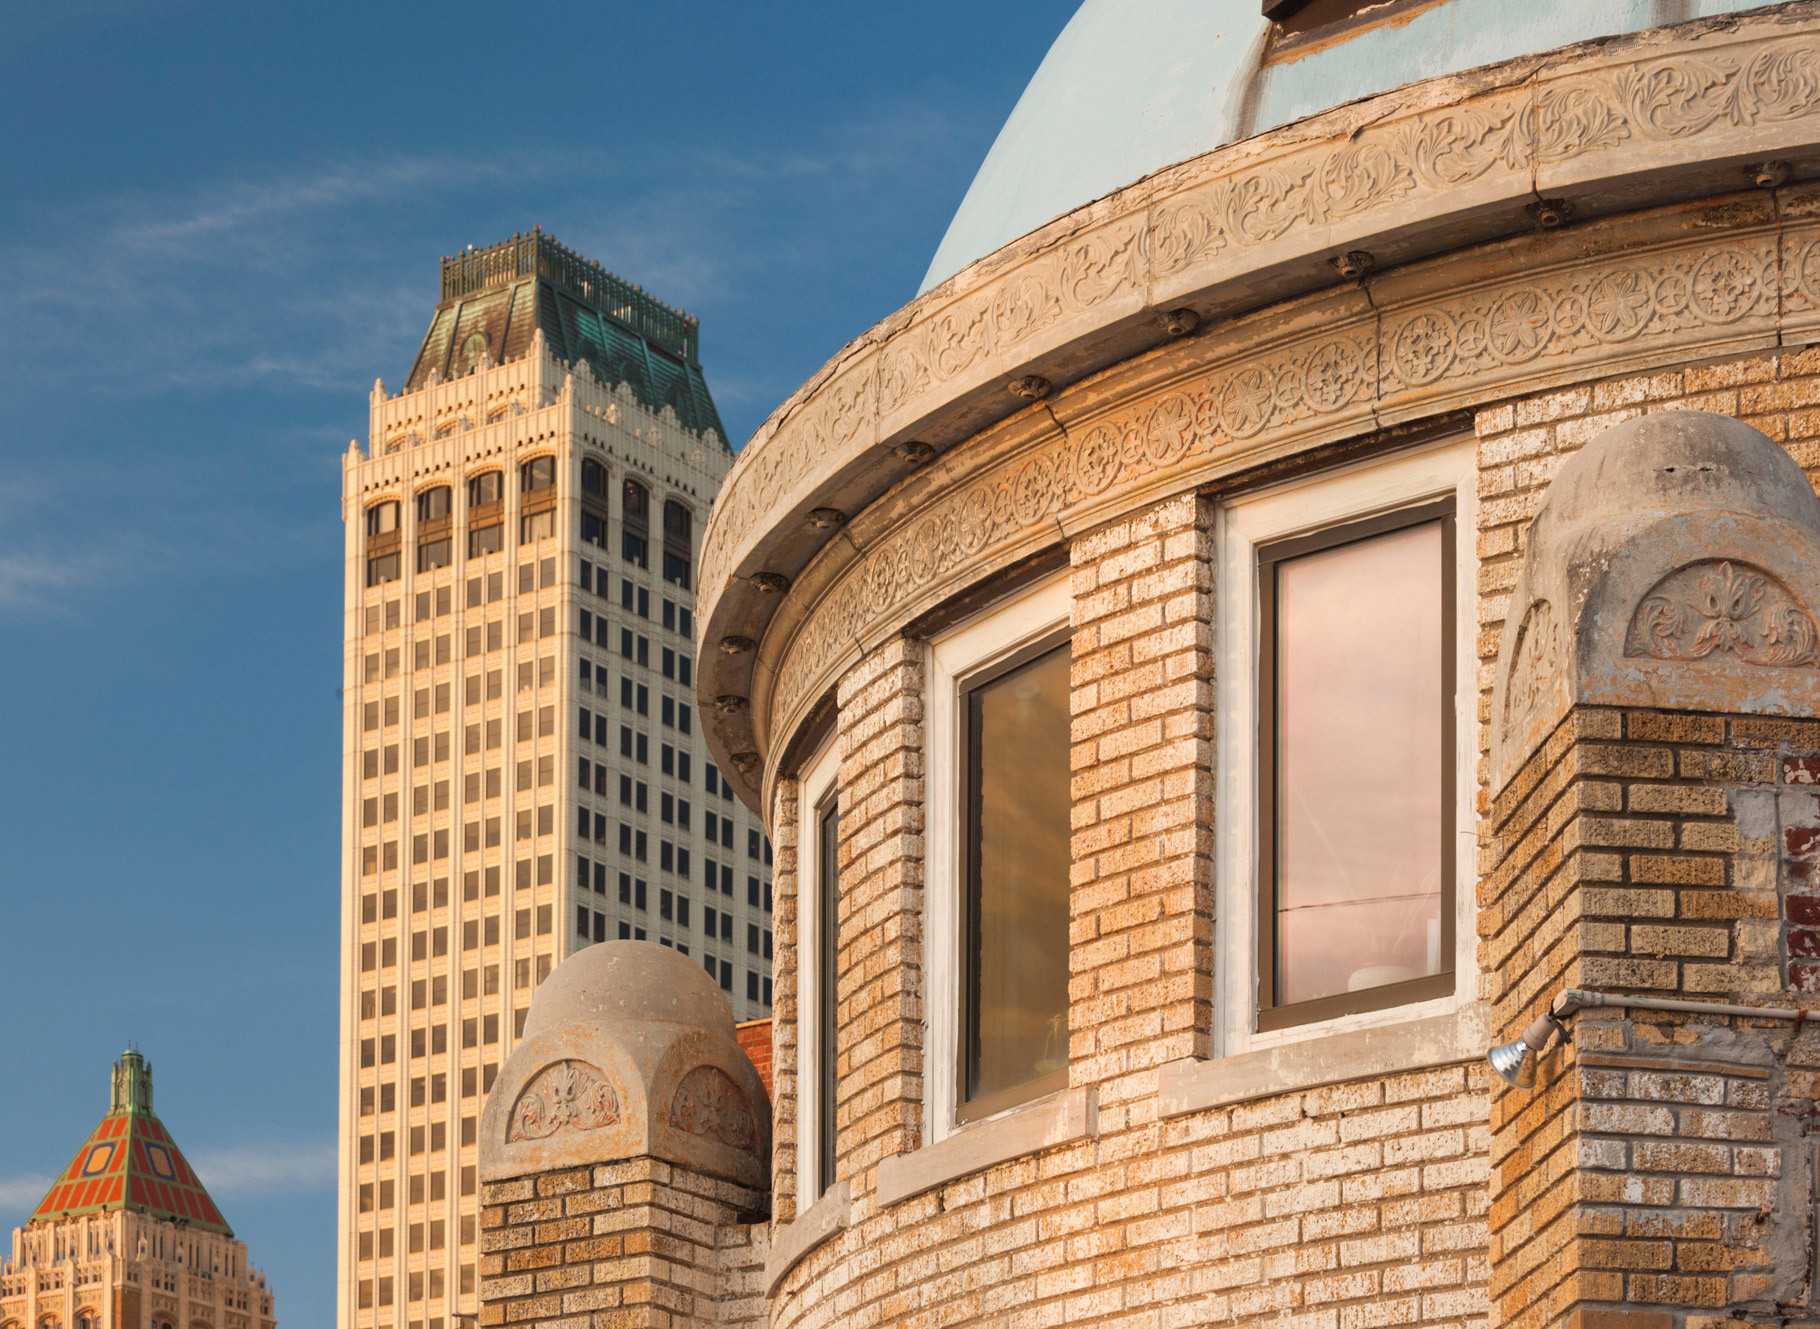 A view of the Blue Dome building in downtown Tulsa